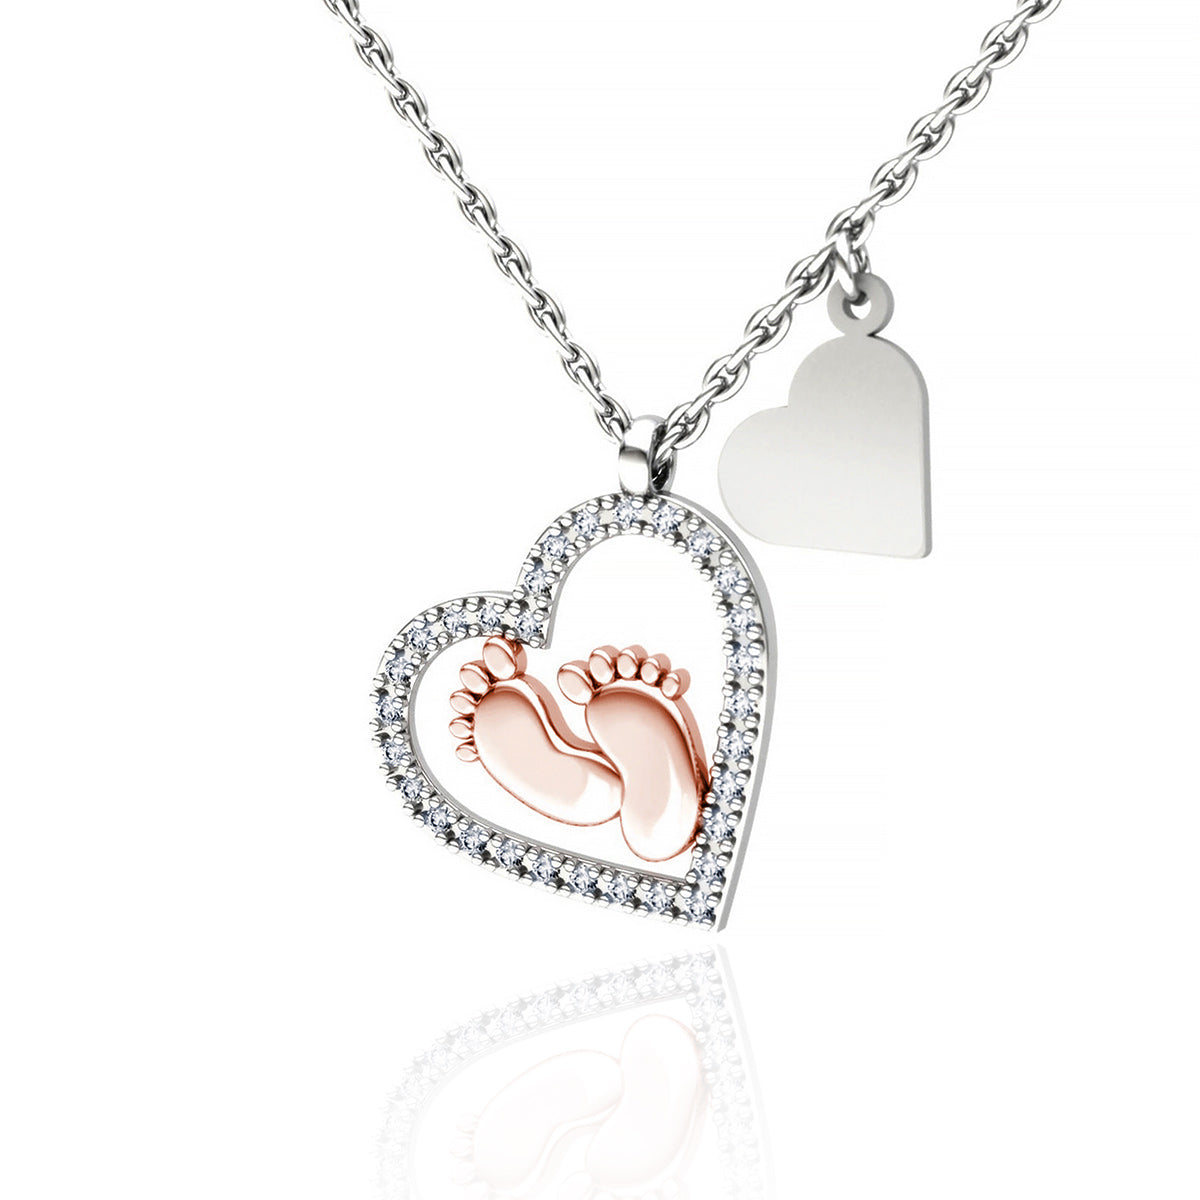 To Our Mommy (Twins Version) - Baby Feet Heart Pendant Necklace Gift Set